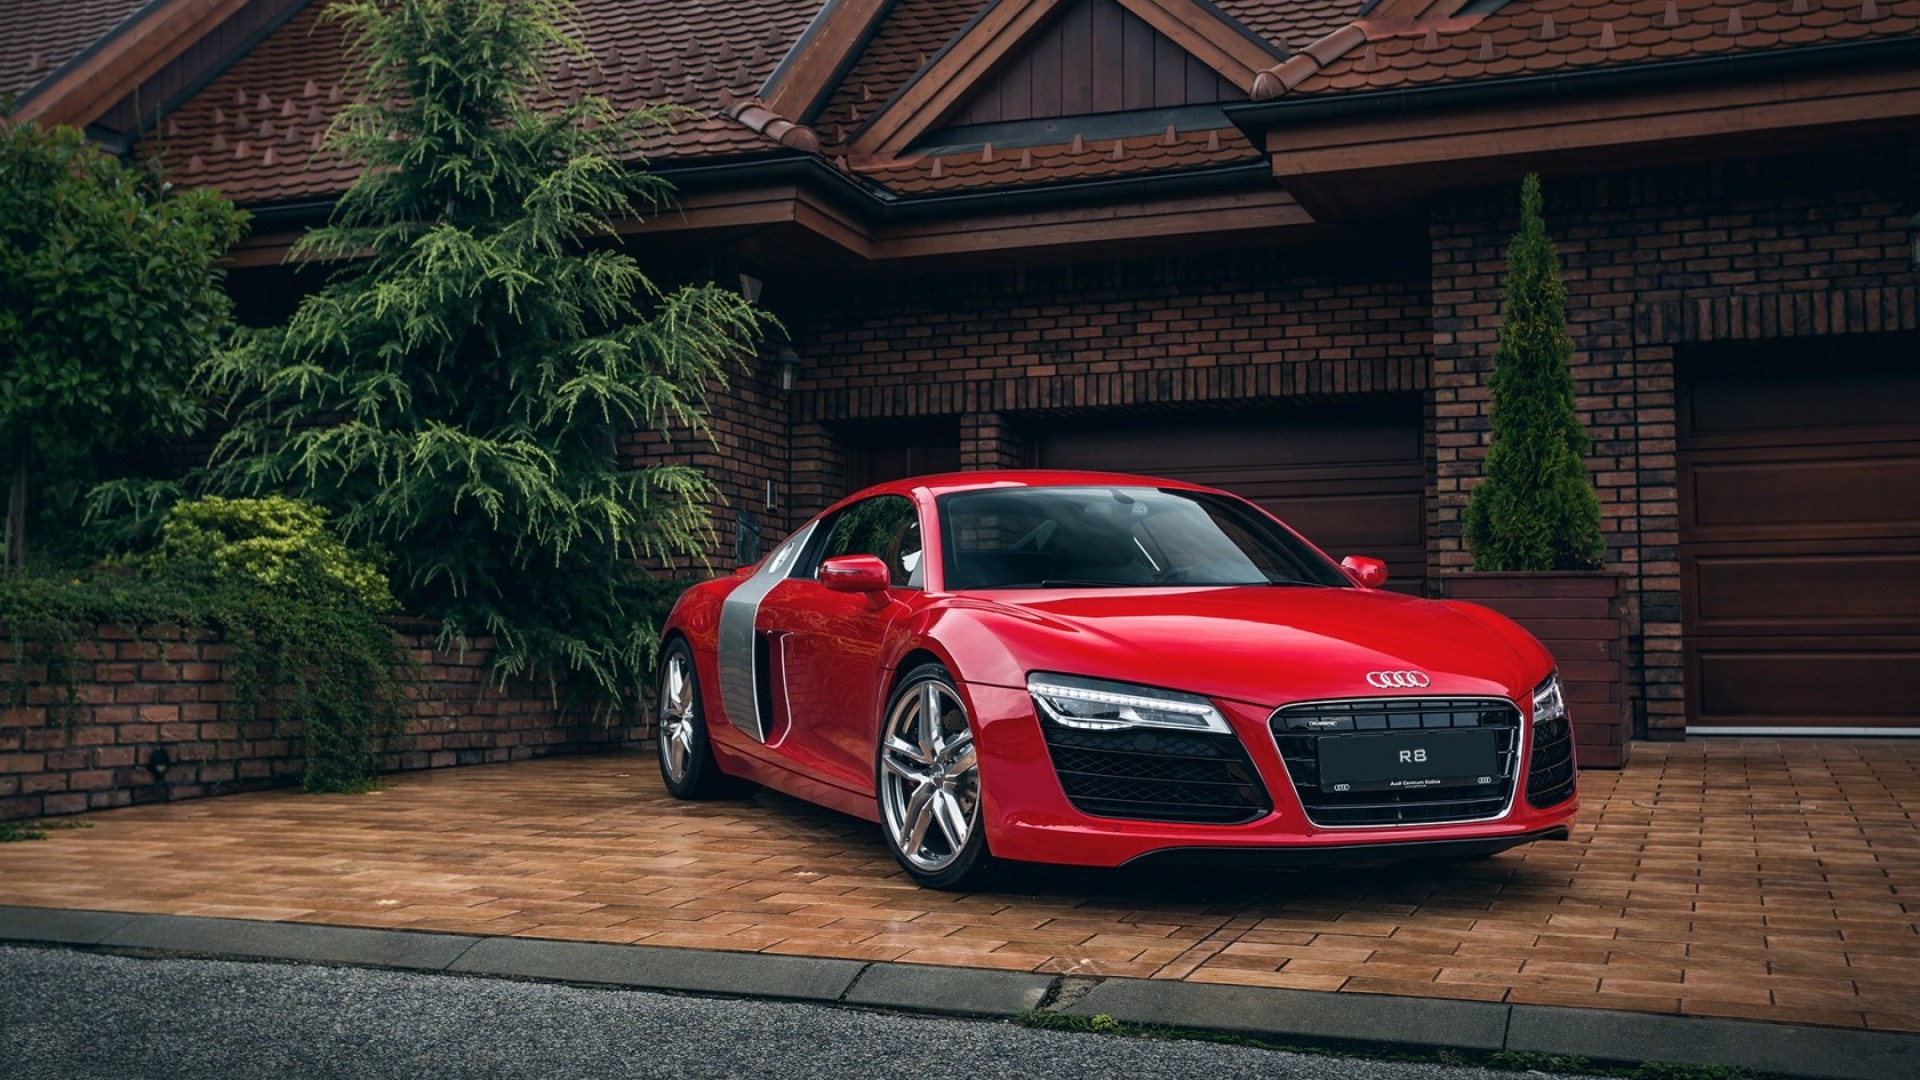 1920x1080  Audi R8 Red Front View Full Hd 1080p Background hd 1080p Audi